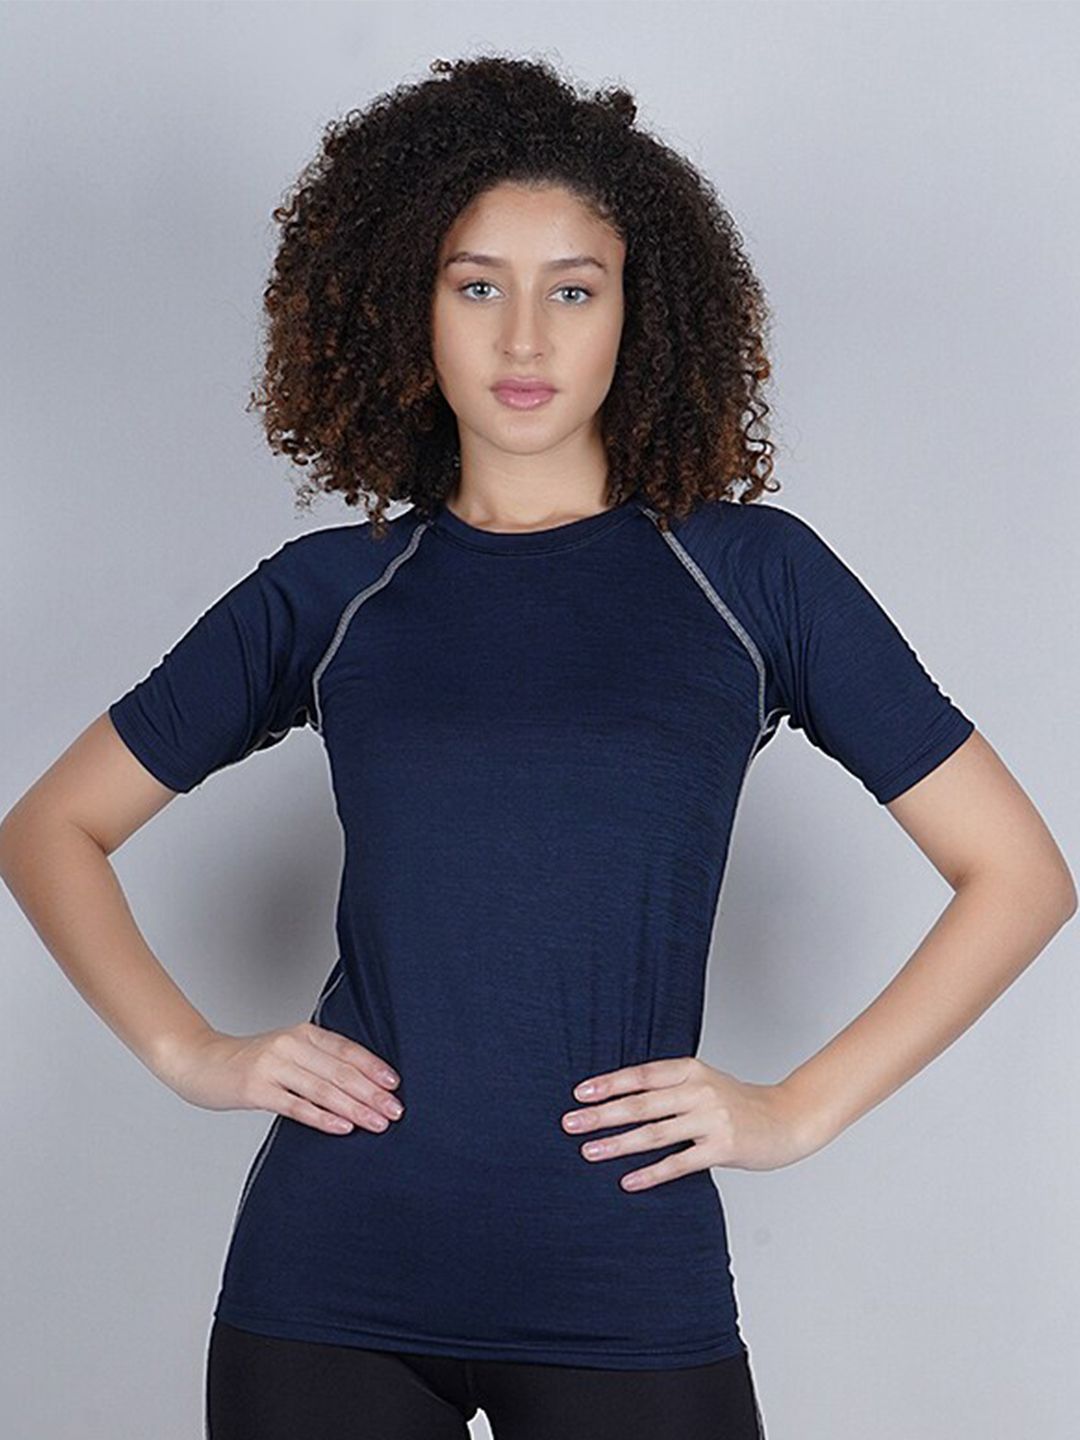 NEVER LOSE Round Neck Compression Quick Dry Moisture Wicking Training T-shirt Price in India